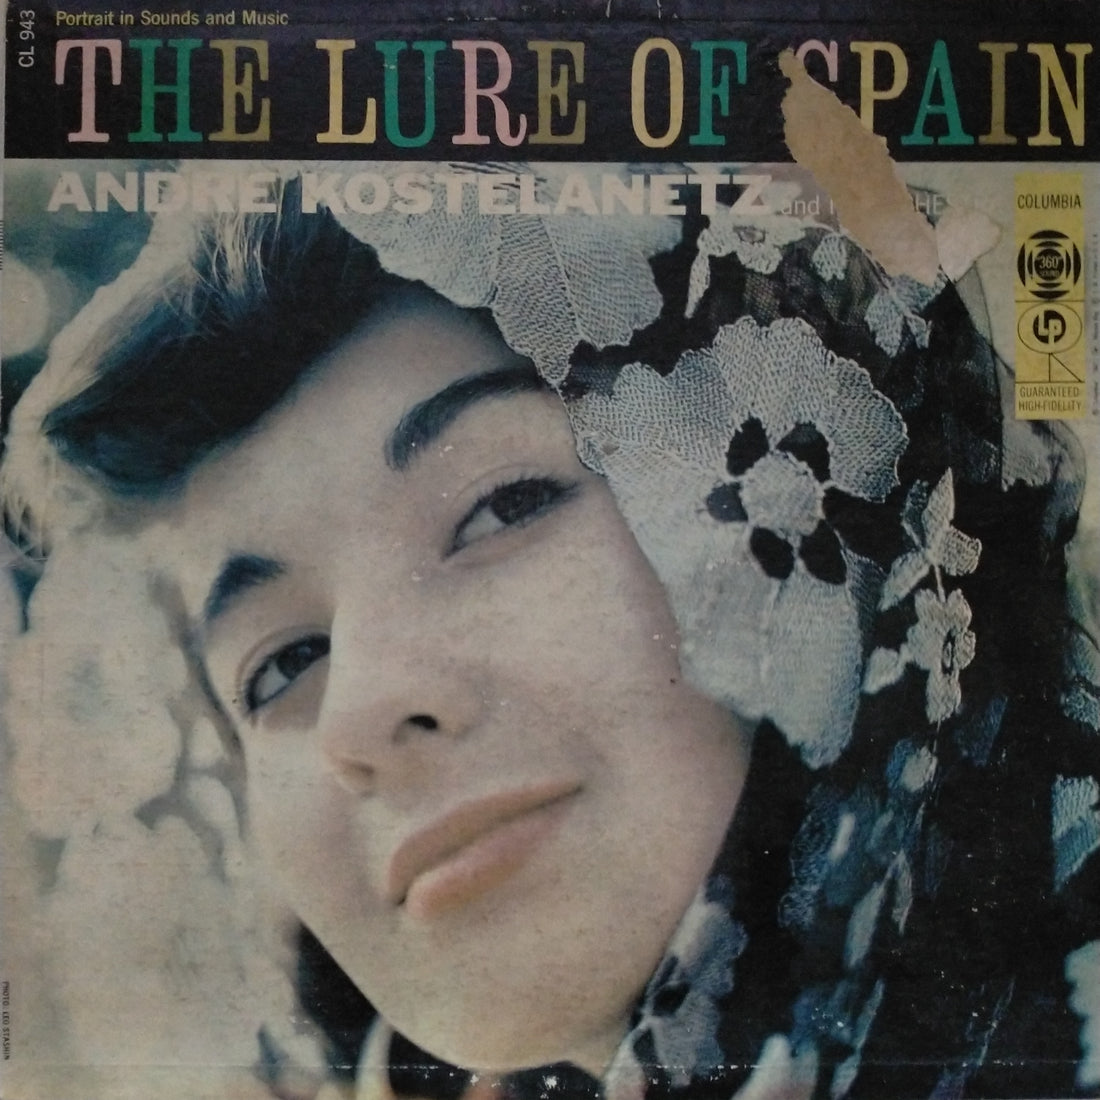 André Kostelanetz And His Orchestra - The Lure Of Spain (Vinyl) (VG)